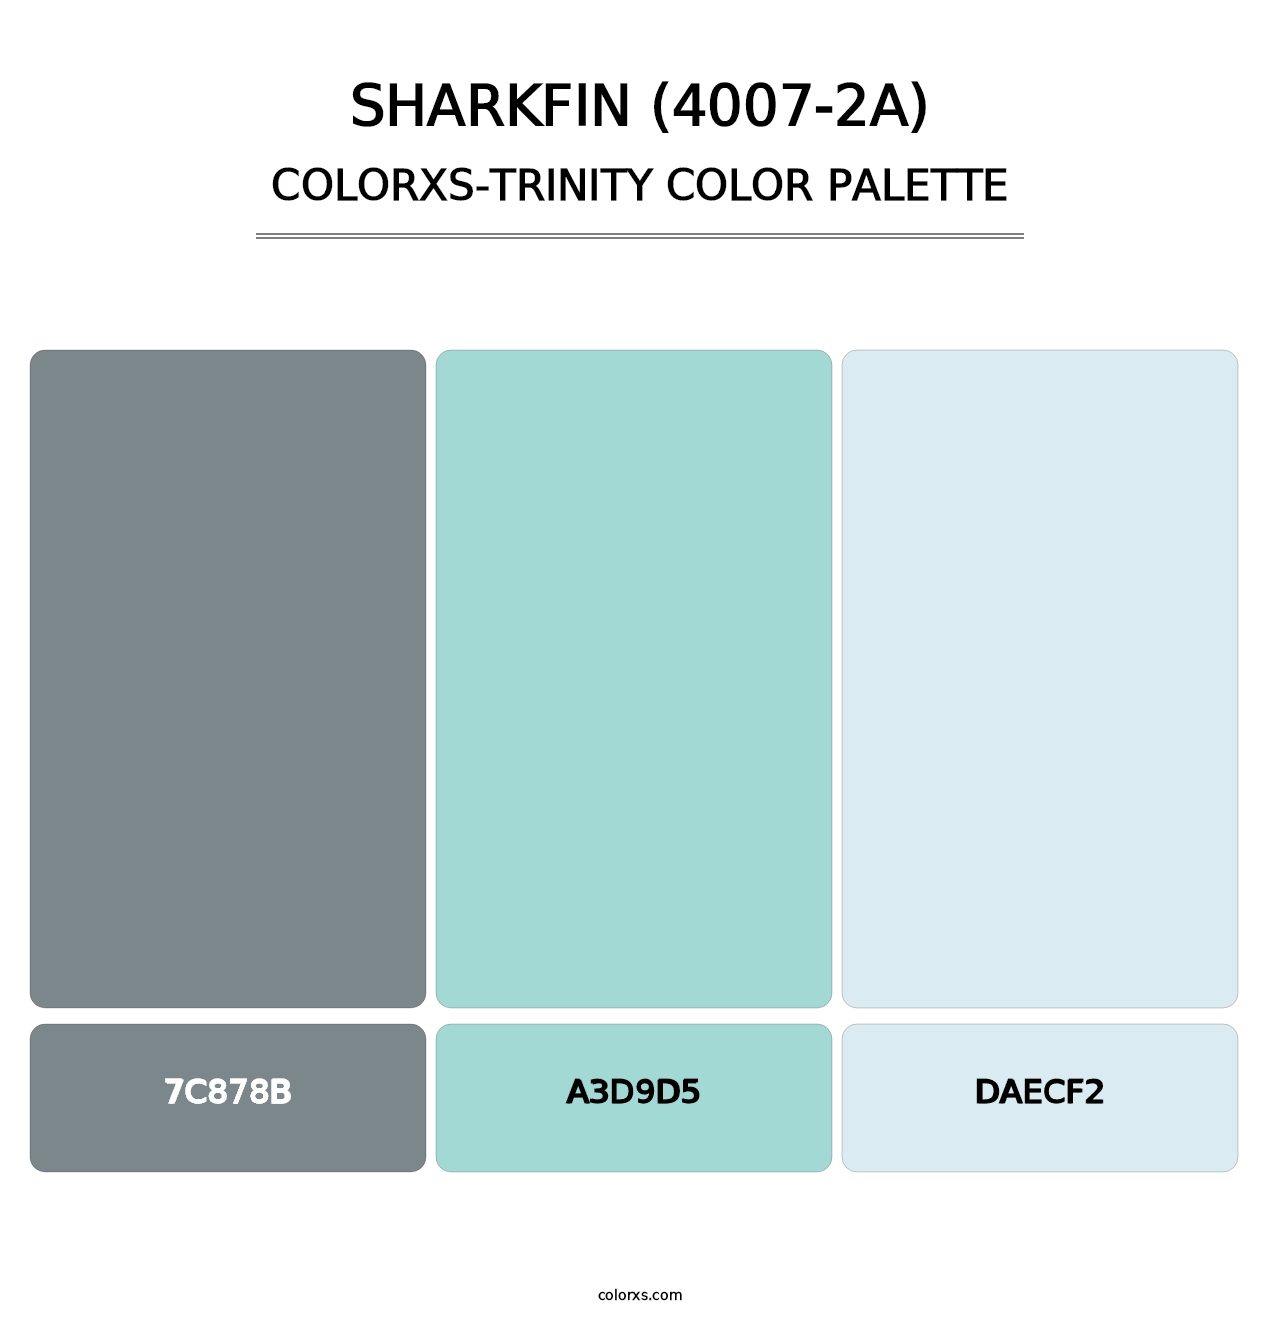 Sharkfin (4007-2A) - Colorxs Trinity Palette